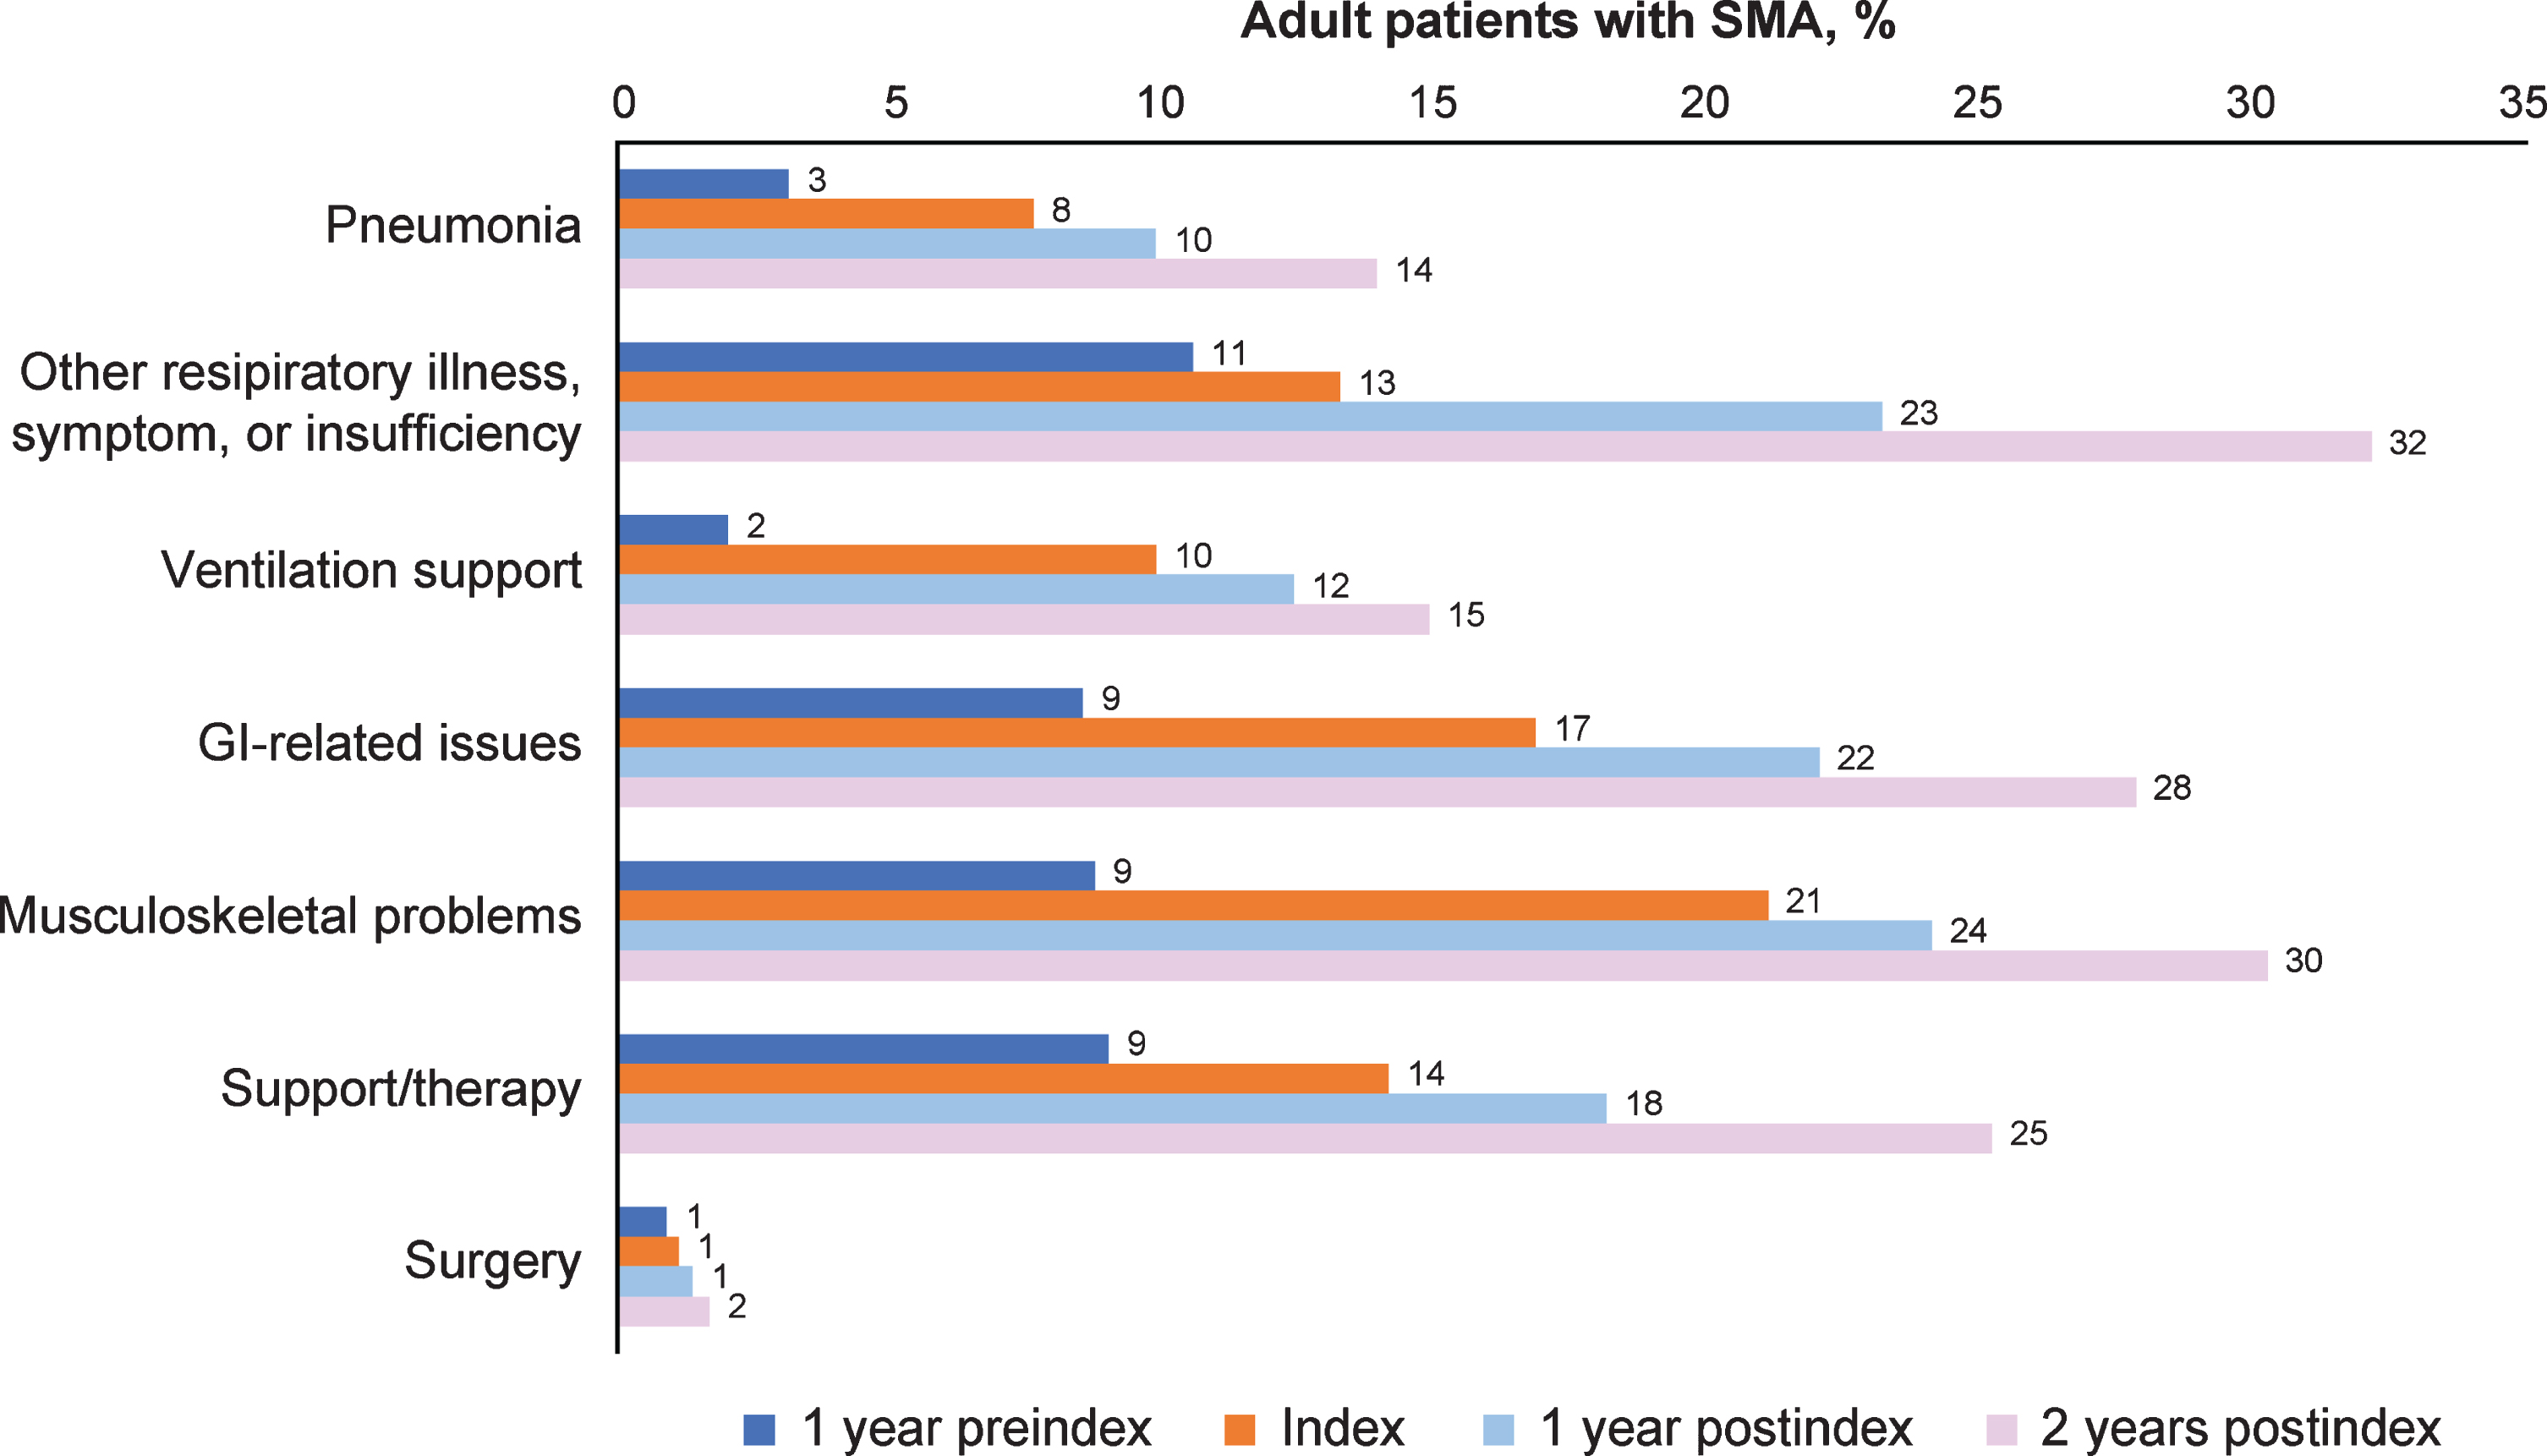 Symptoms and complications across time periods for all adult patients with SMA (n = 446). GI = gastrointestinal; SMA = spinal muscular atrophy. Other respiratory illness, symptom, or insufficiency includes acute and chronic bronchitis, acute and chronic sinusitis, acute tonsillitis, acute upper respiratory infection, respiratory infection, respiratory symptom or insufficiency, and cold/cough/fever/influenza. Ventilation support is defined by codes listed in Supplemental Table 1 and includes intermittent positive pressure breathing device, respiratory treatments (cough assist/suction machine), bilevel positive airway pressure (BiPAP)/continuous positive airway pressure (CPAP), and tracheostomy. GI-related issues include esophagitis/reflux, dysphagia, feeding problems, gastrostomy (G-tube) feeding/upper GI procedures. Musculoskeletal problems include muscle weakness, lack of coordination, osteoporosis/fracture/other bony abnormality, scoliosis, contracture/dislocation/subluxation. Support/therapy includes occupational therapy and wheelchairs. Surgery includes scoliosis surgery and other surgeries.